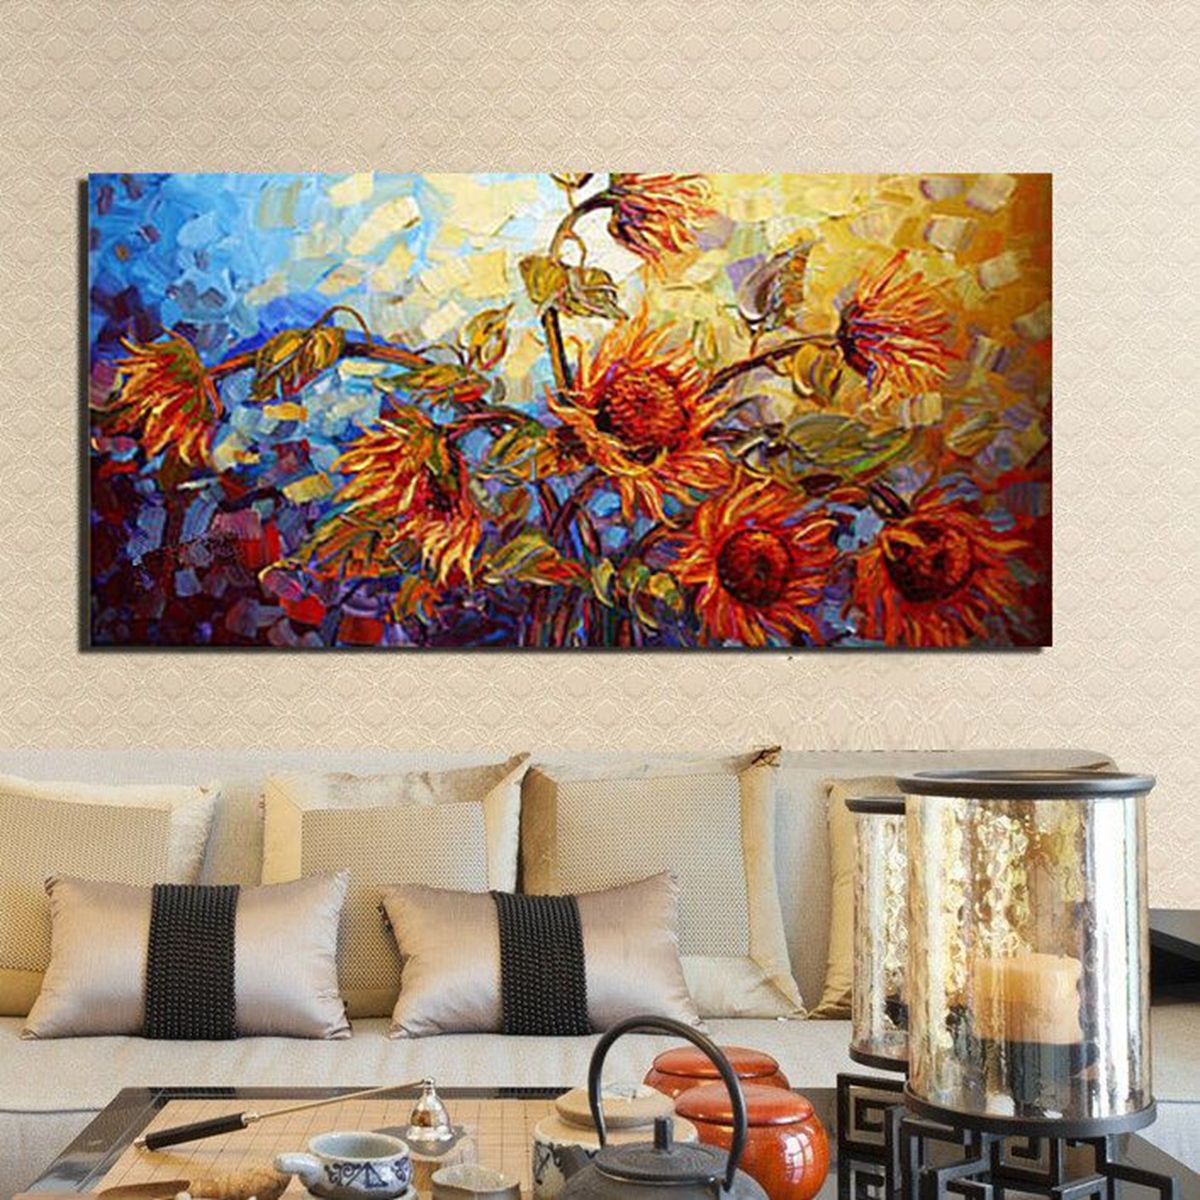 Unframed/framed Modern Canvas Oil Painting Print Picture Within Recent Modern Framed Art Prints (View 2 of 20)